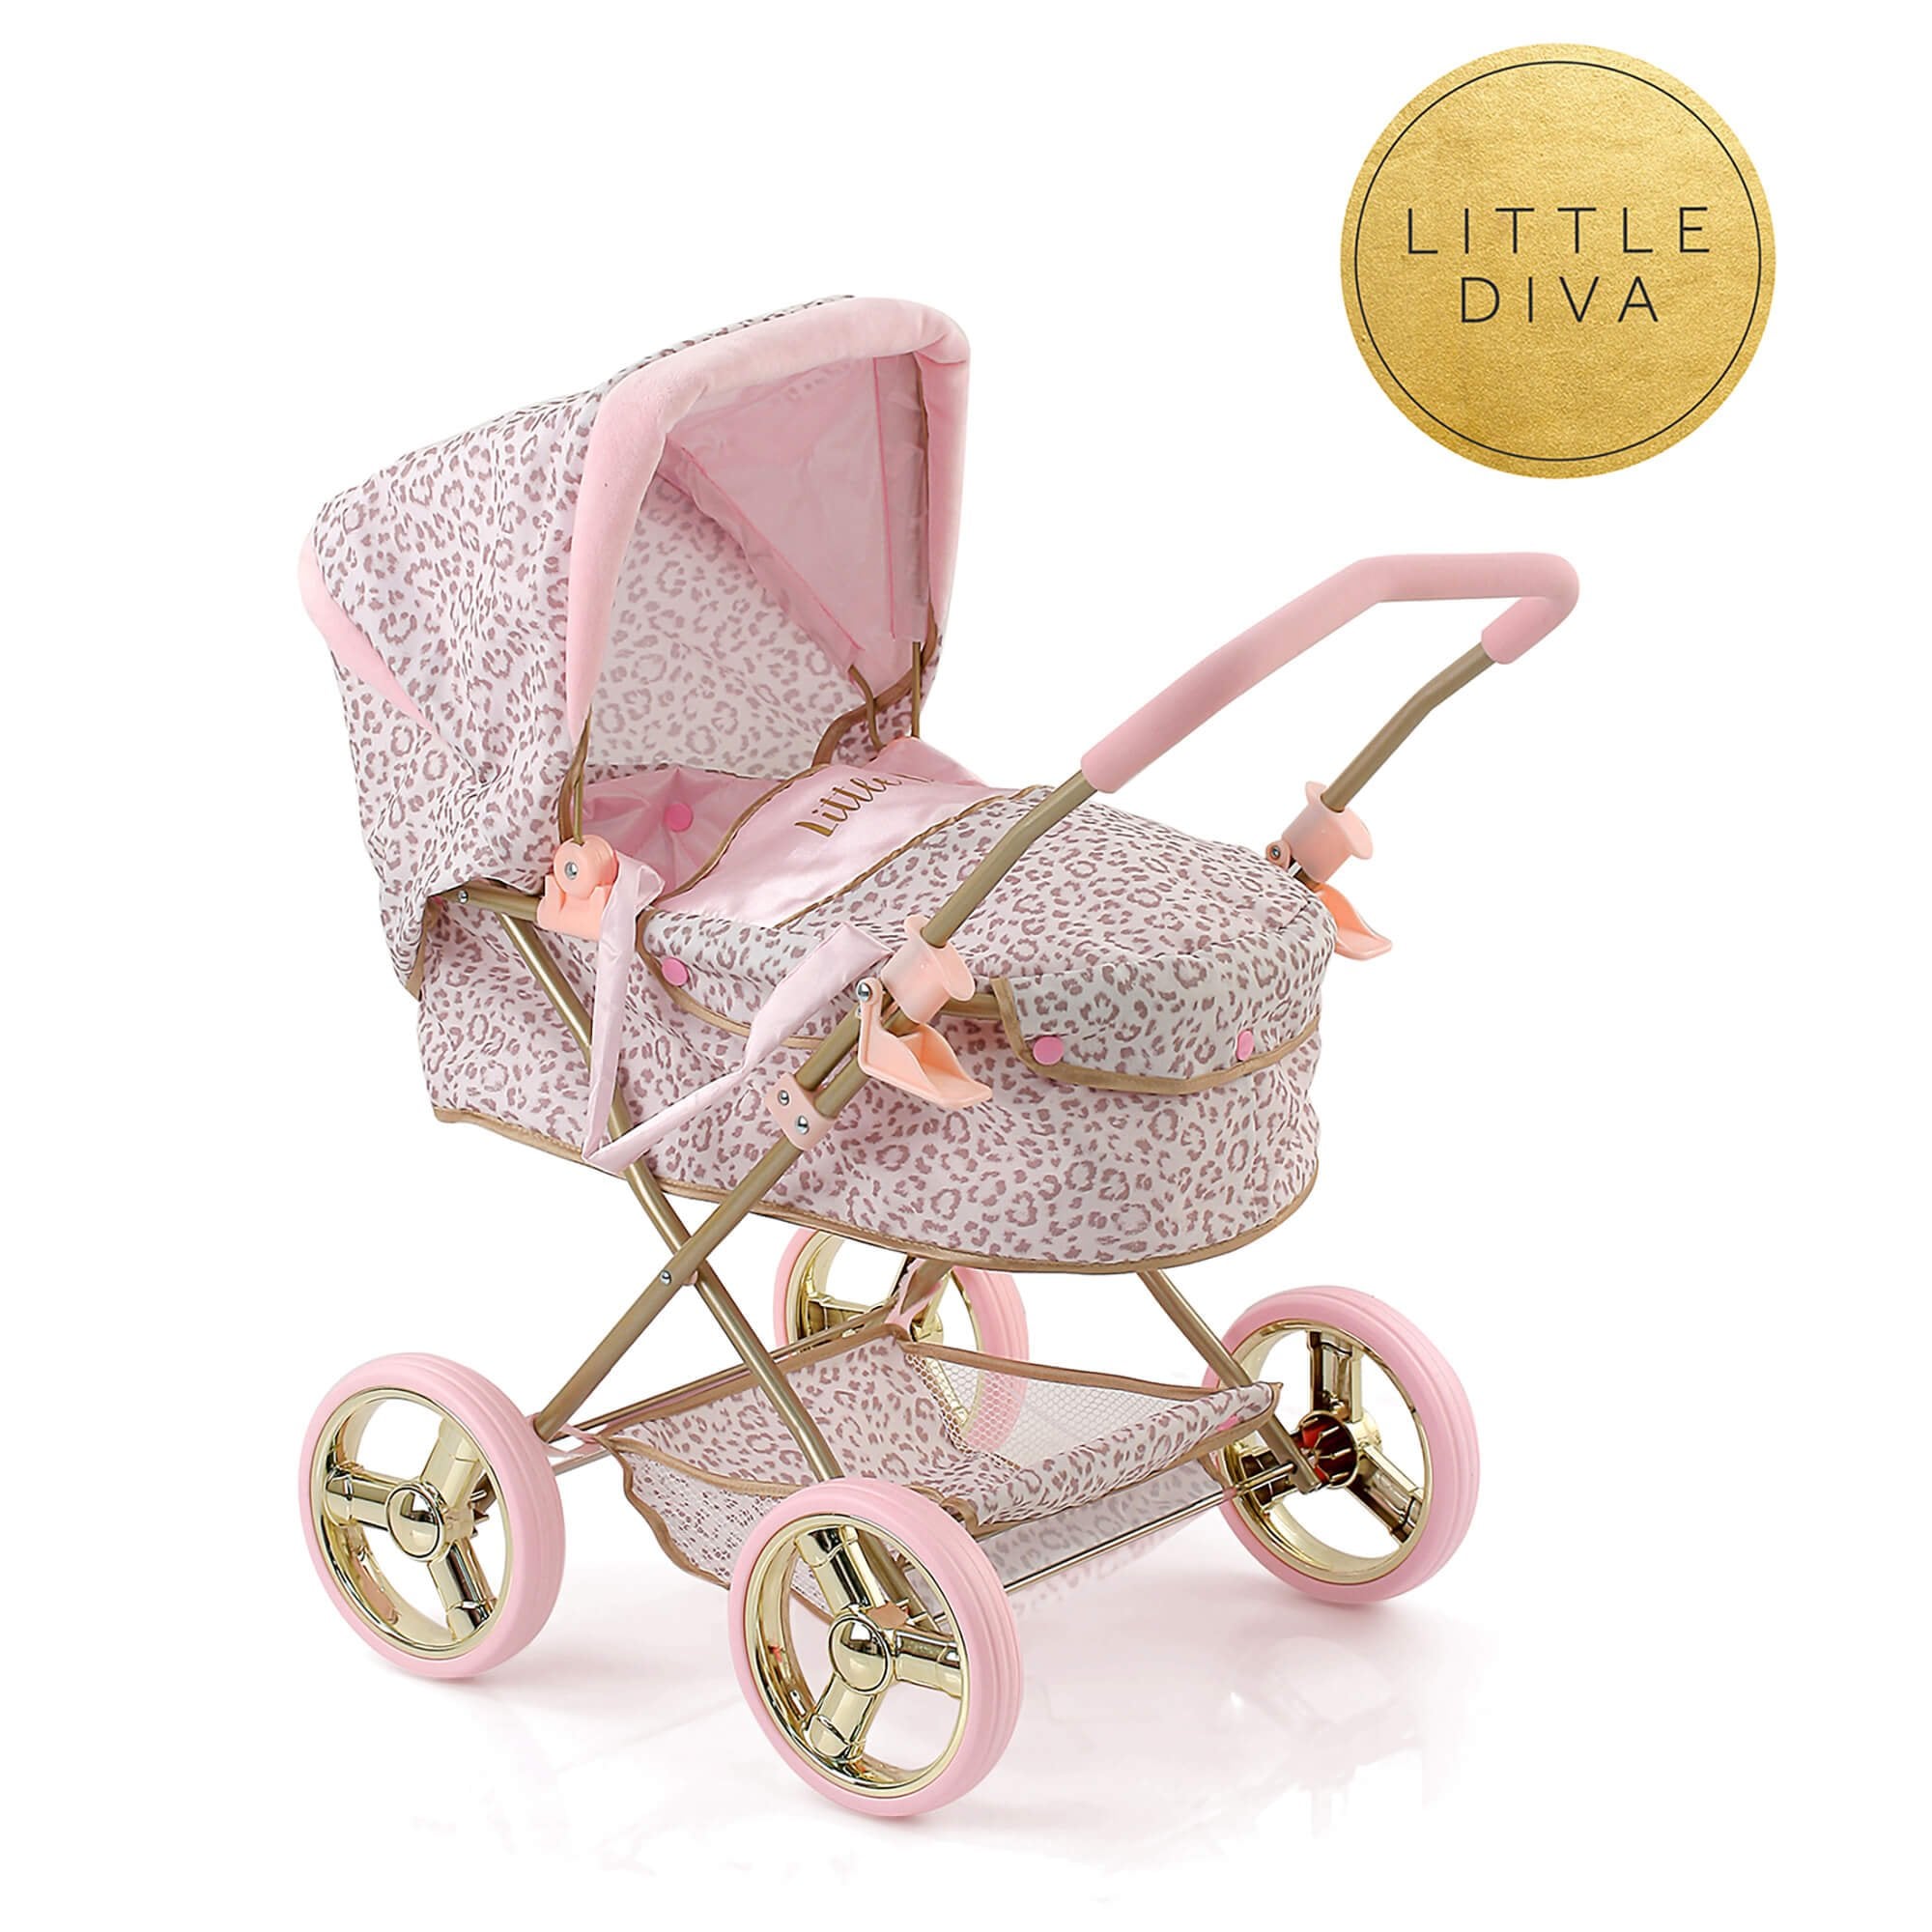 Hauck D86486 Gini Little Diva Removable Soft Bag and Toy Basket in Leopard Look, Folding Doll Pram, Pink/Gold, Normal